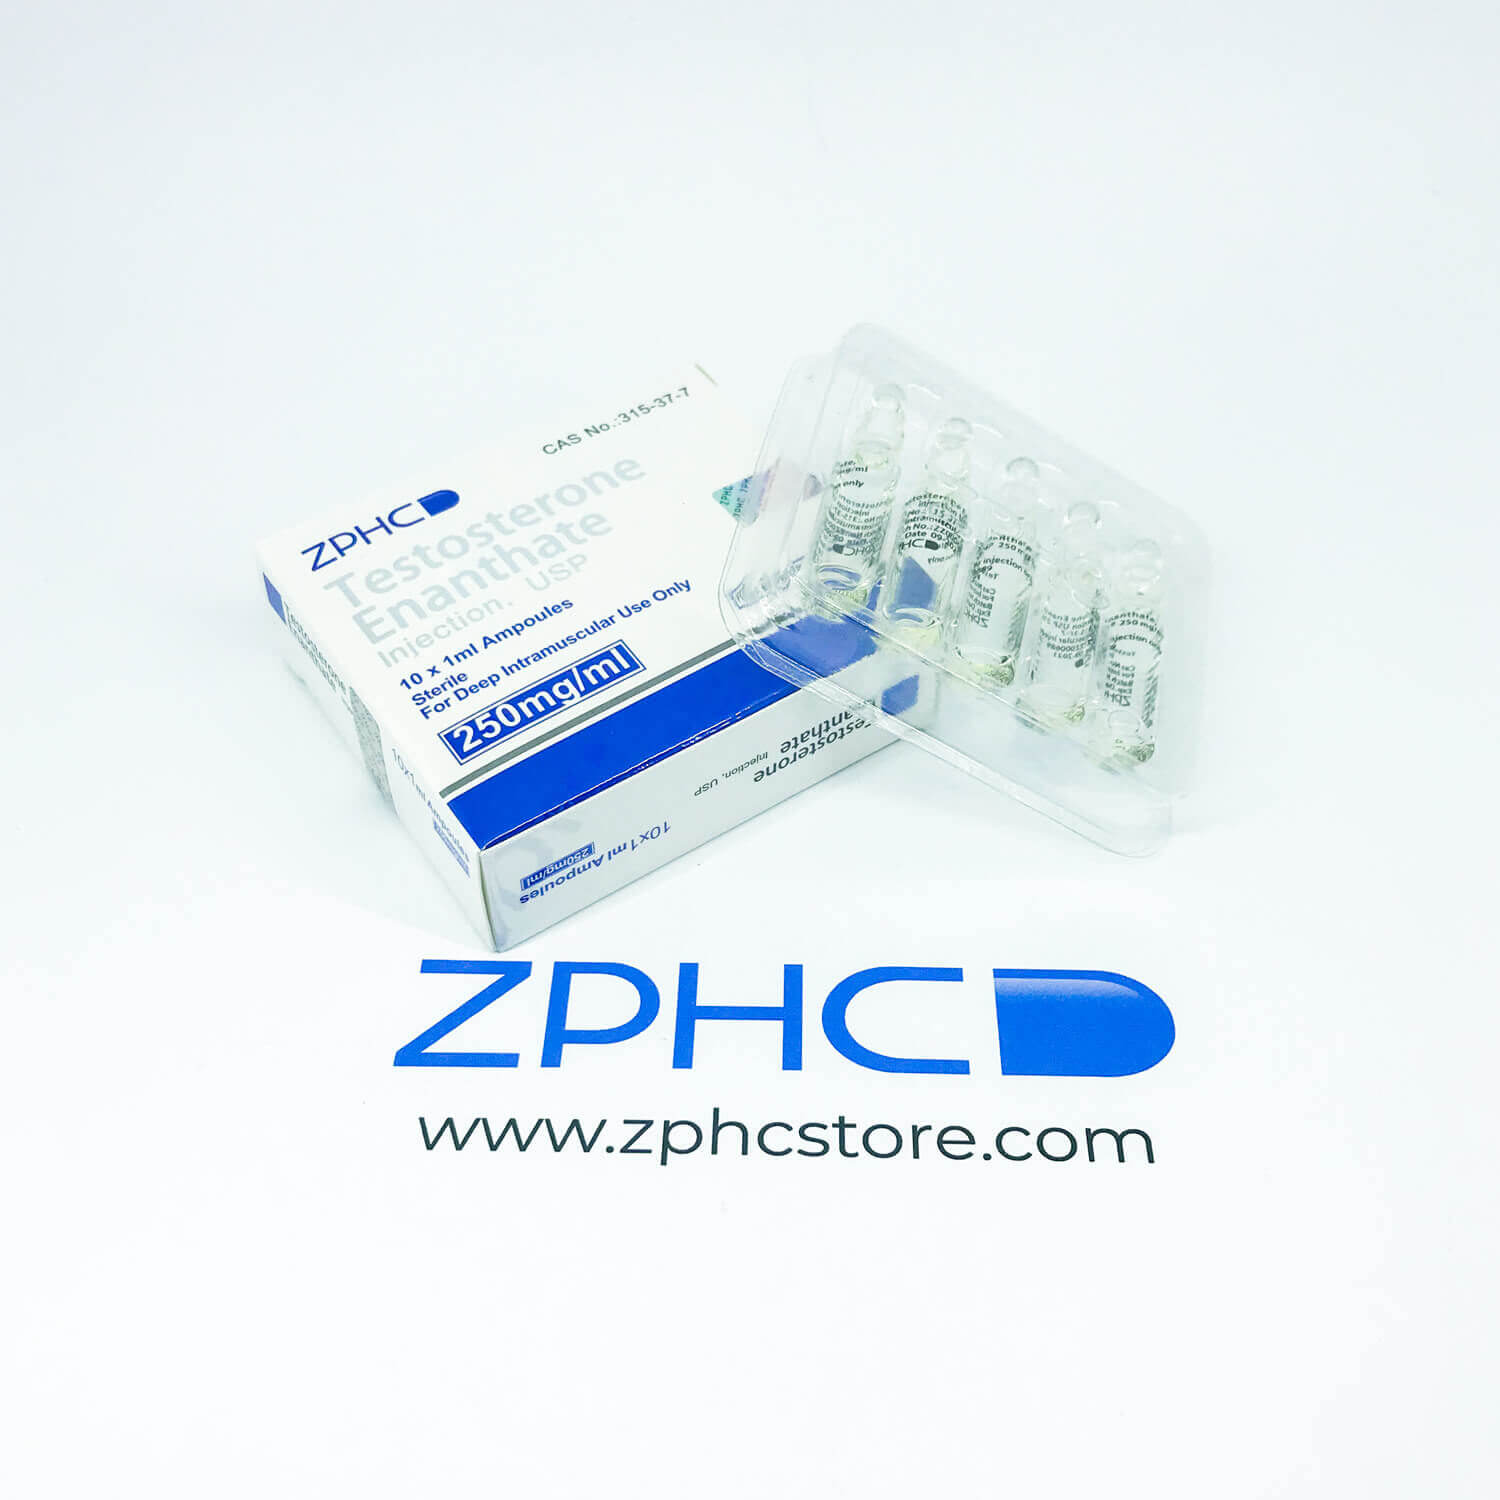 Testosterone Enanthate, Test E amps ZPHC zphcstore.com